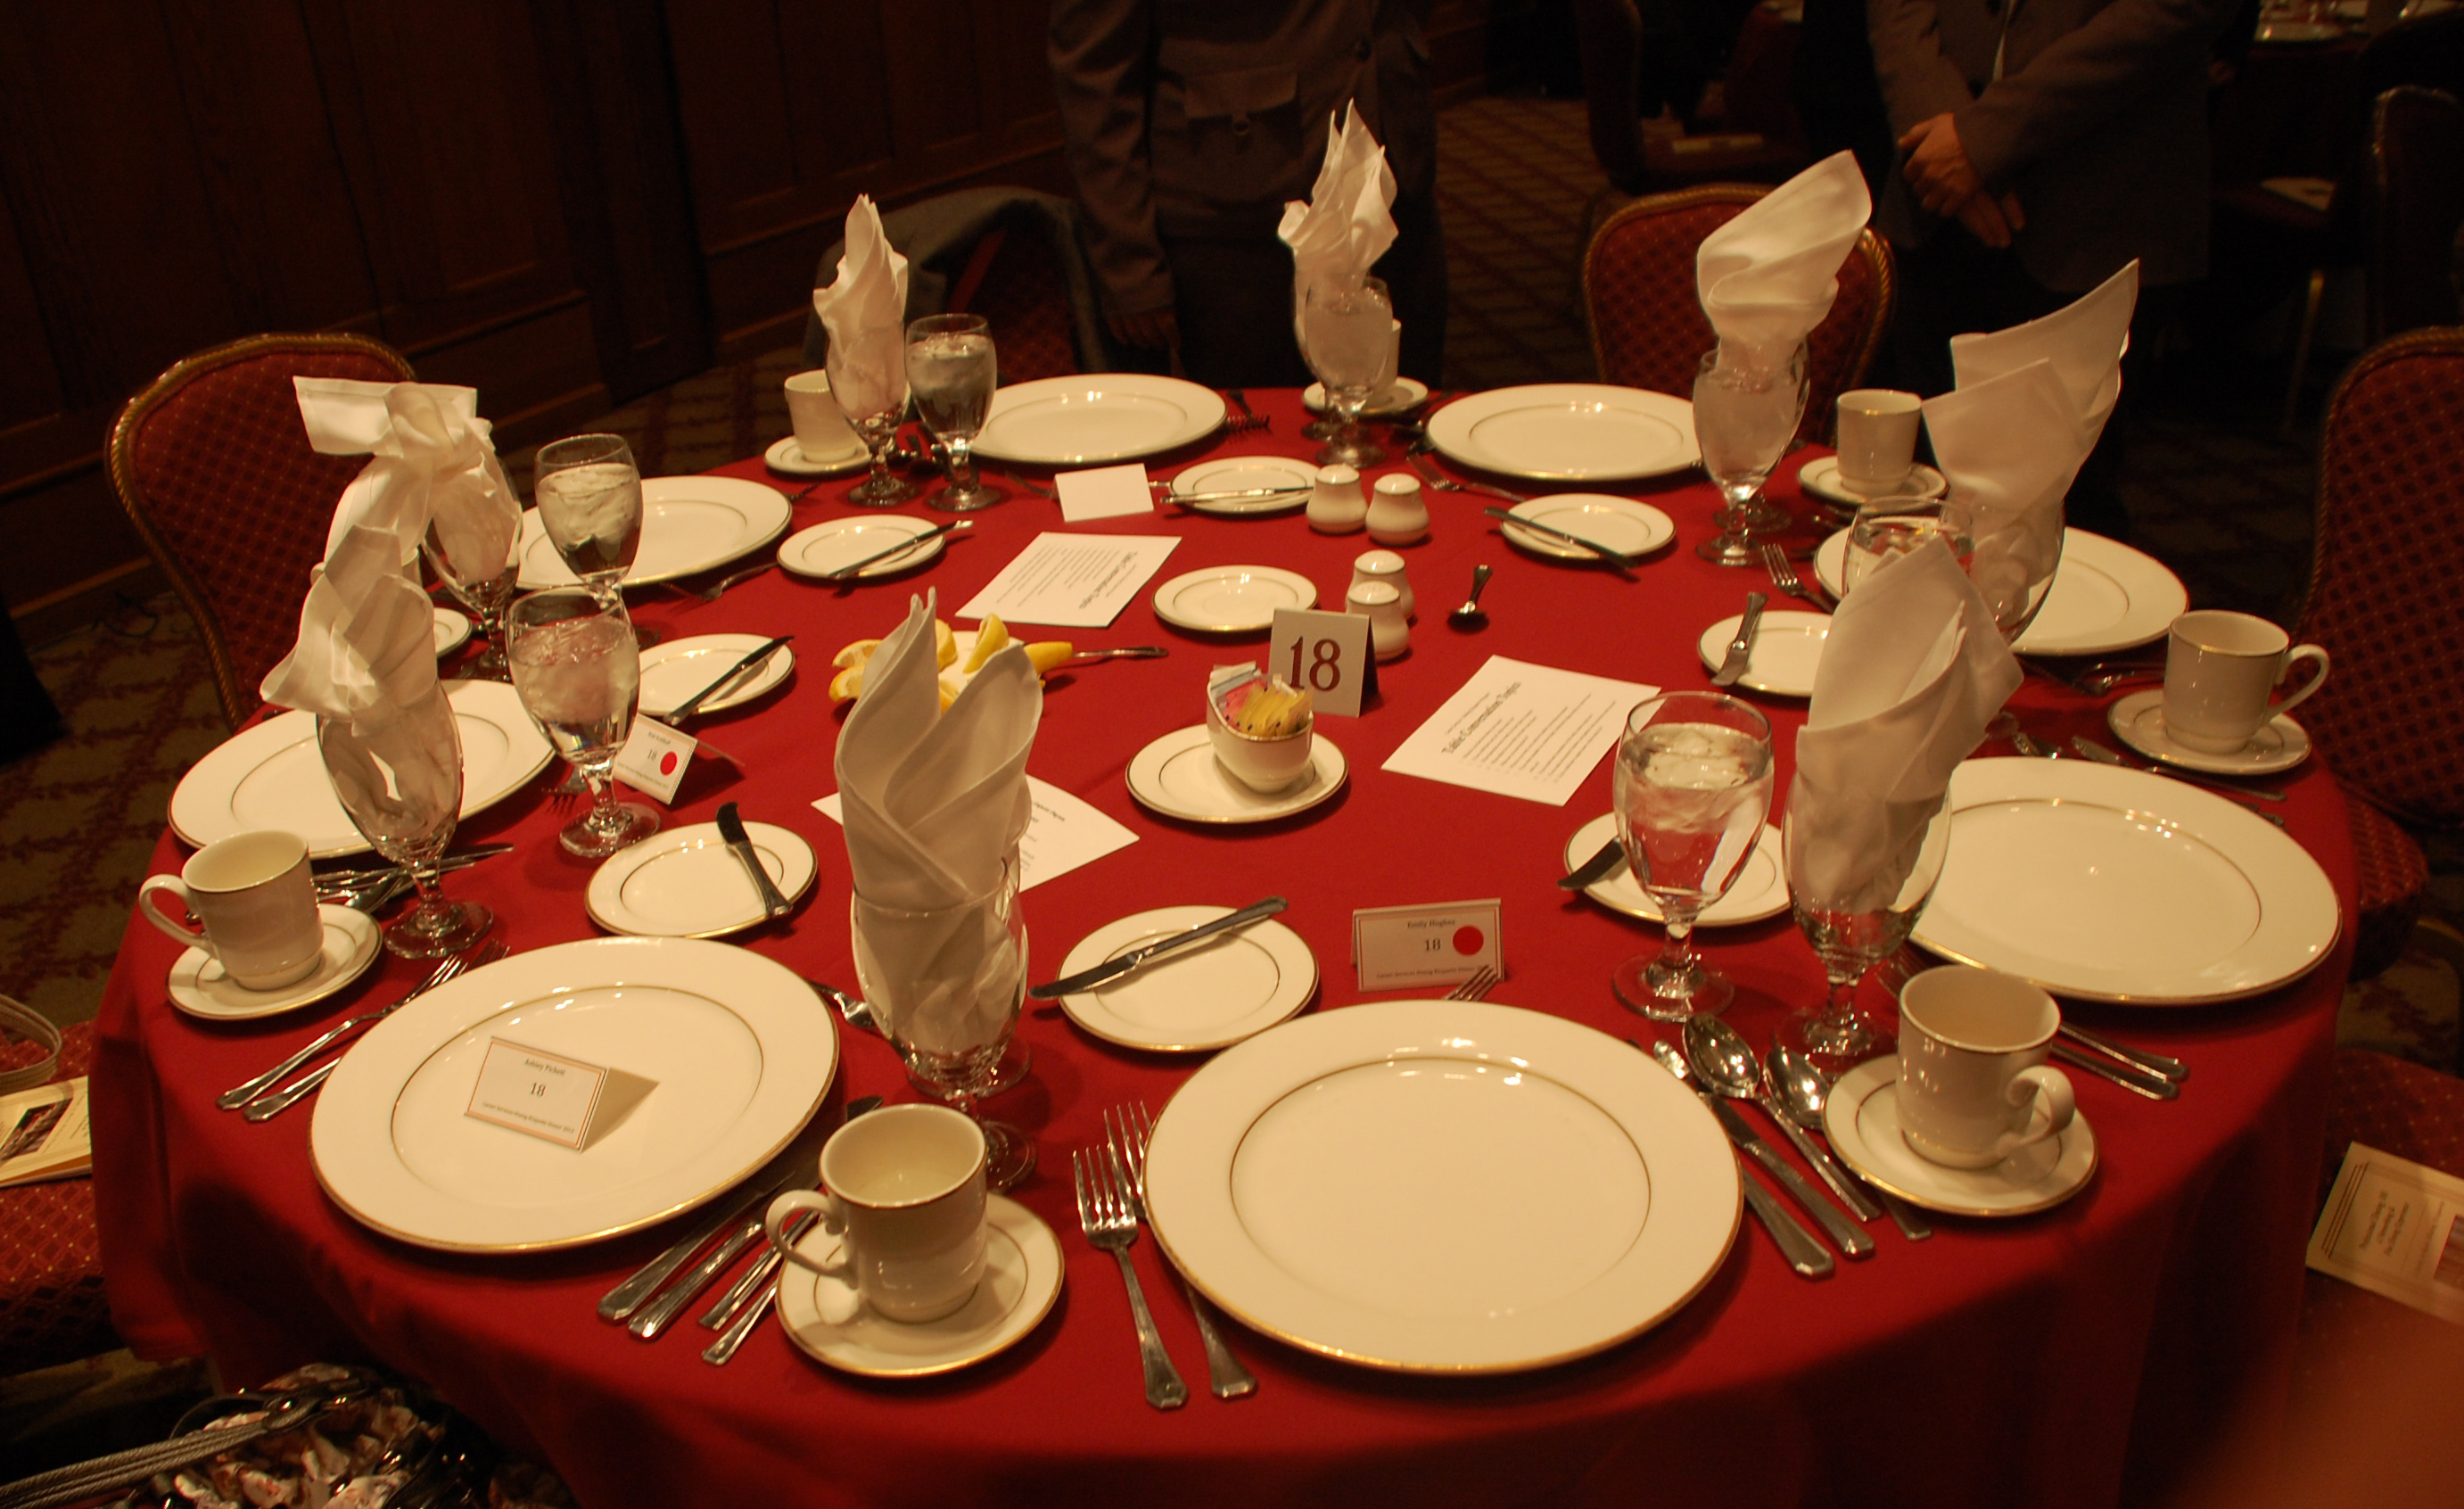 A formal dinner setting on a red tablecloth